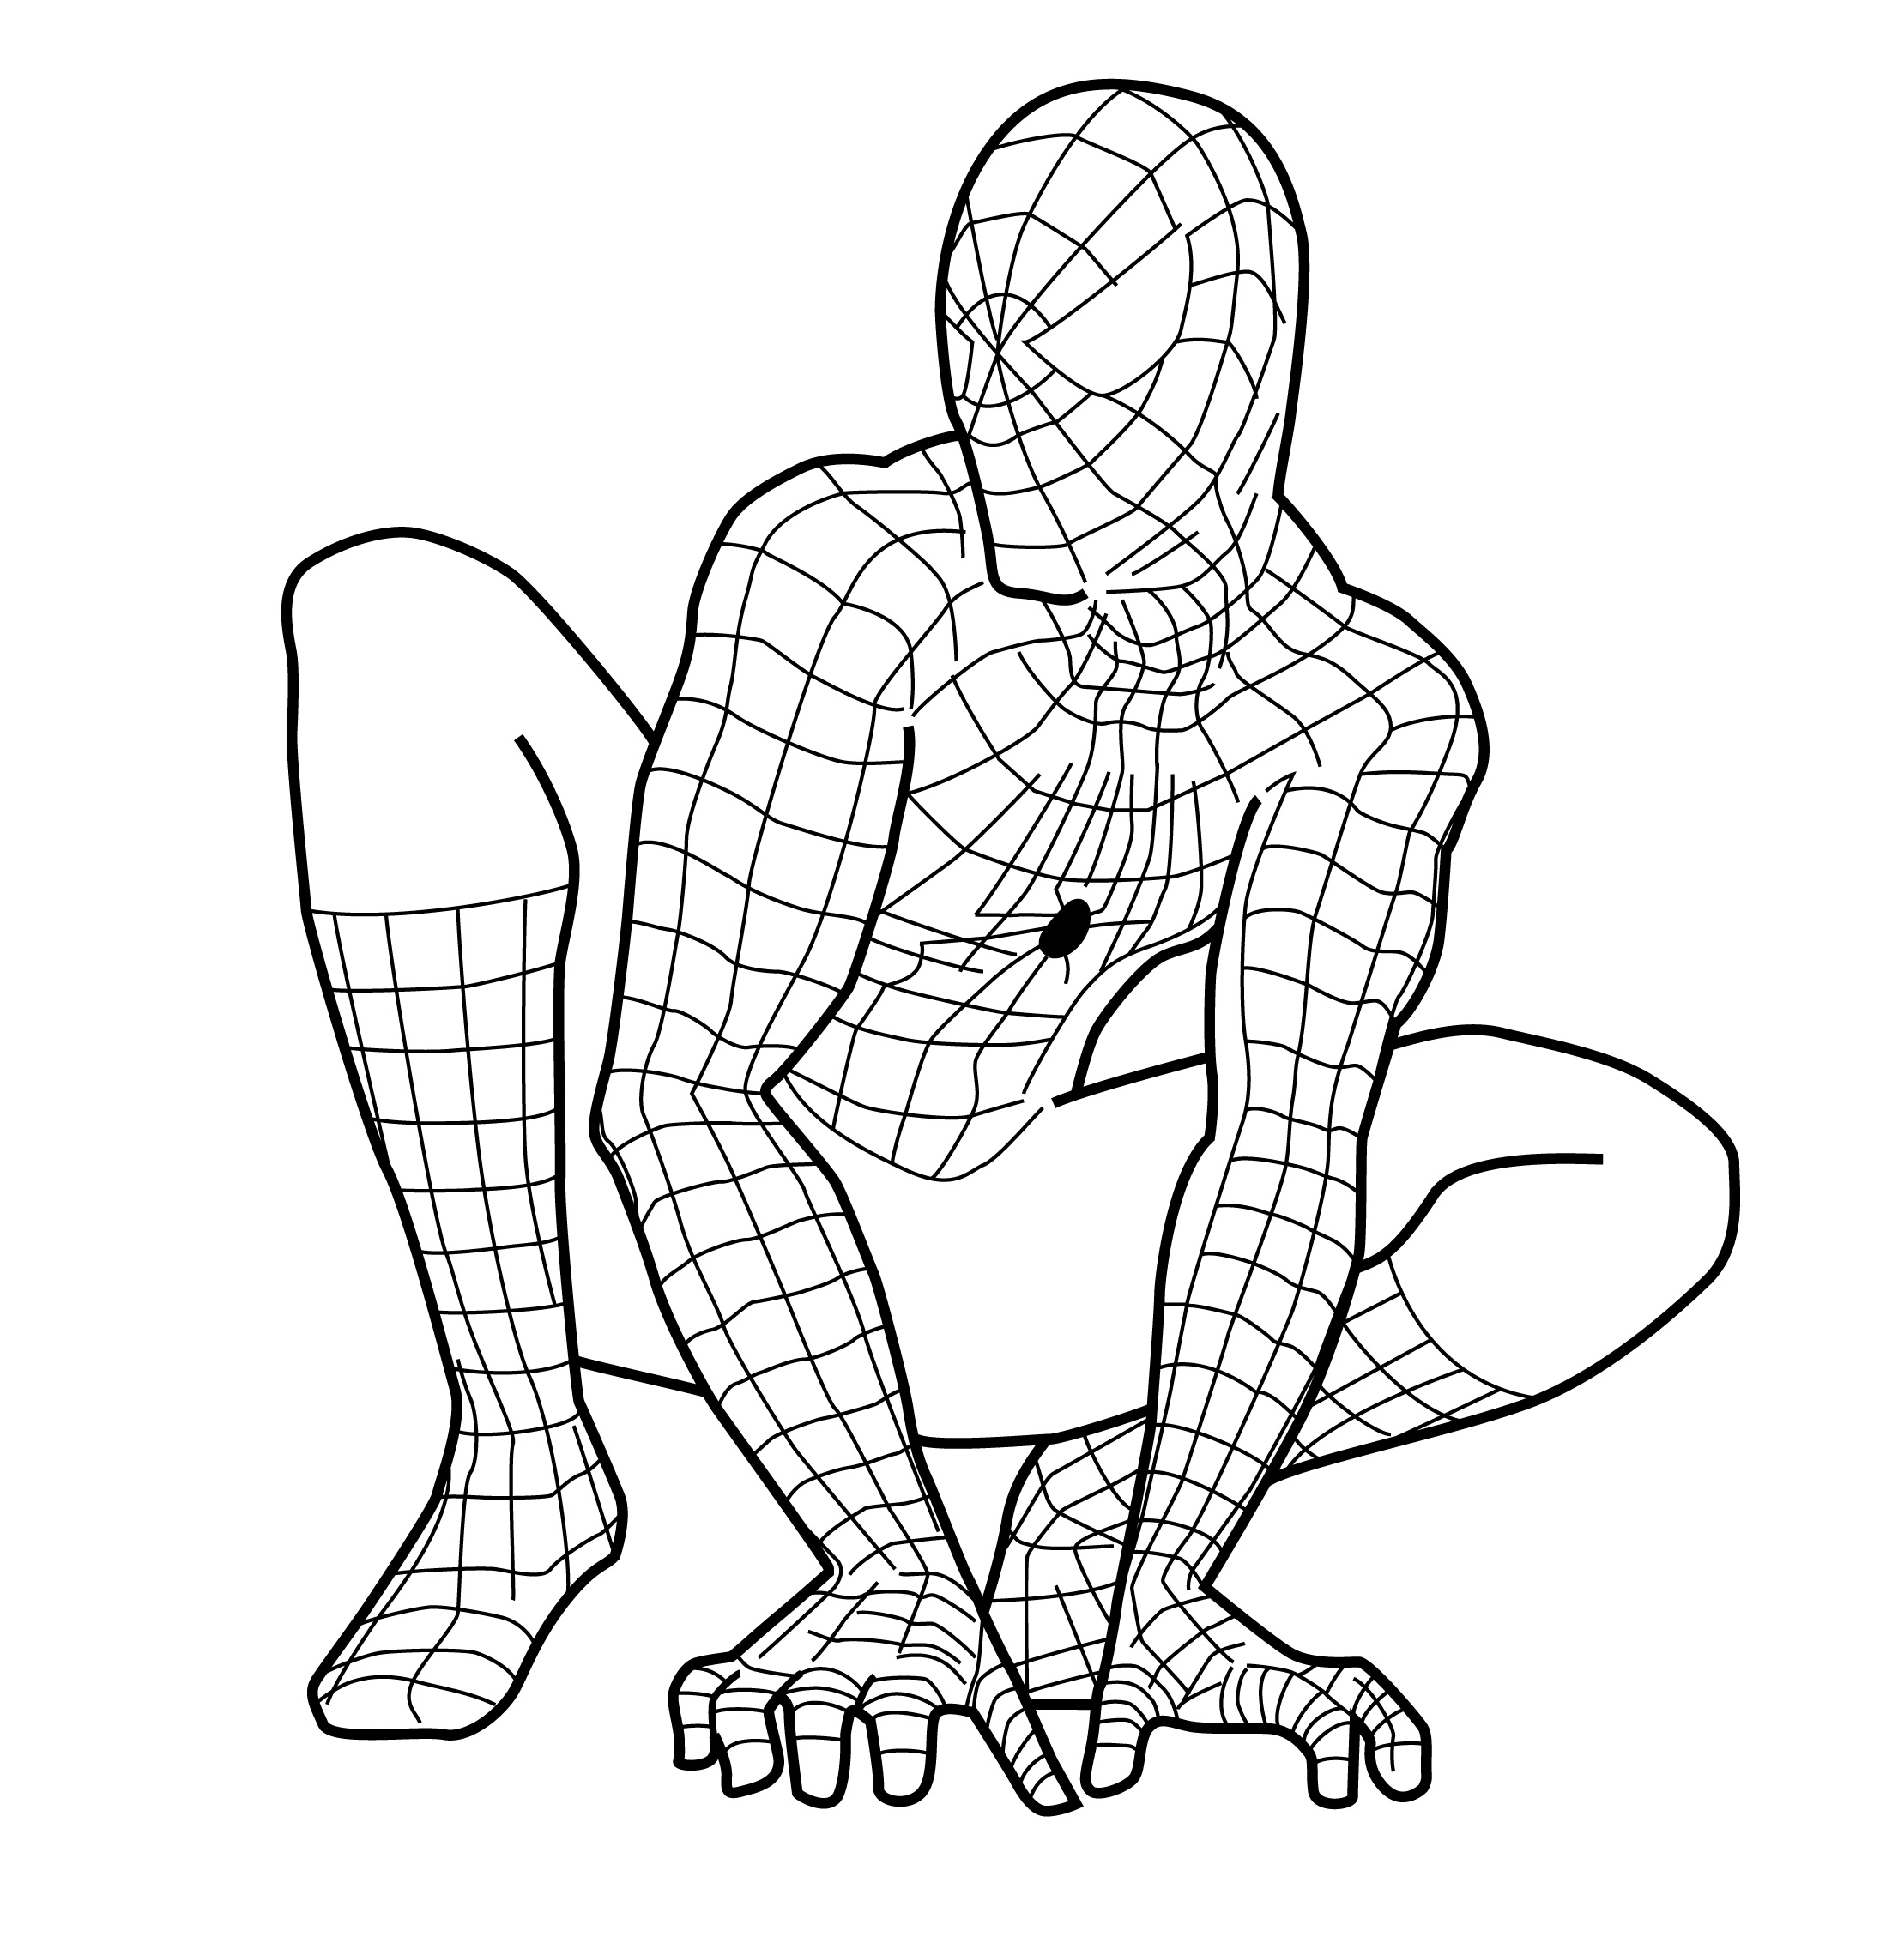 Spiderman Coloring Printable : Spiderman Coloring Pages On Coloring Book Info